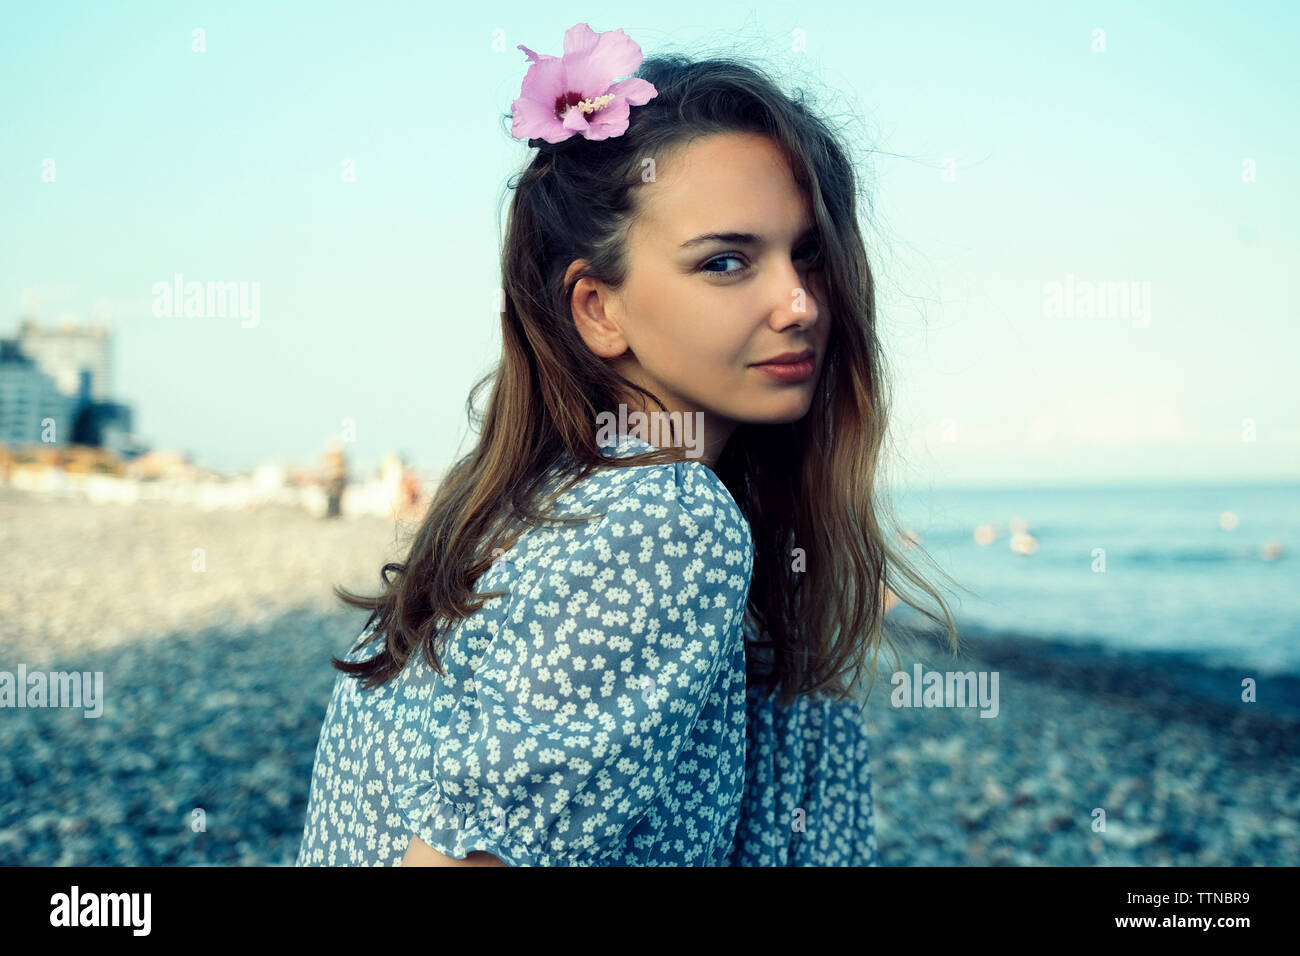 Portrait of woman wearing flower while sitting at beach against clear sky Stock Photo